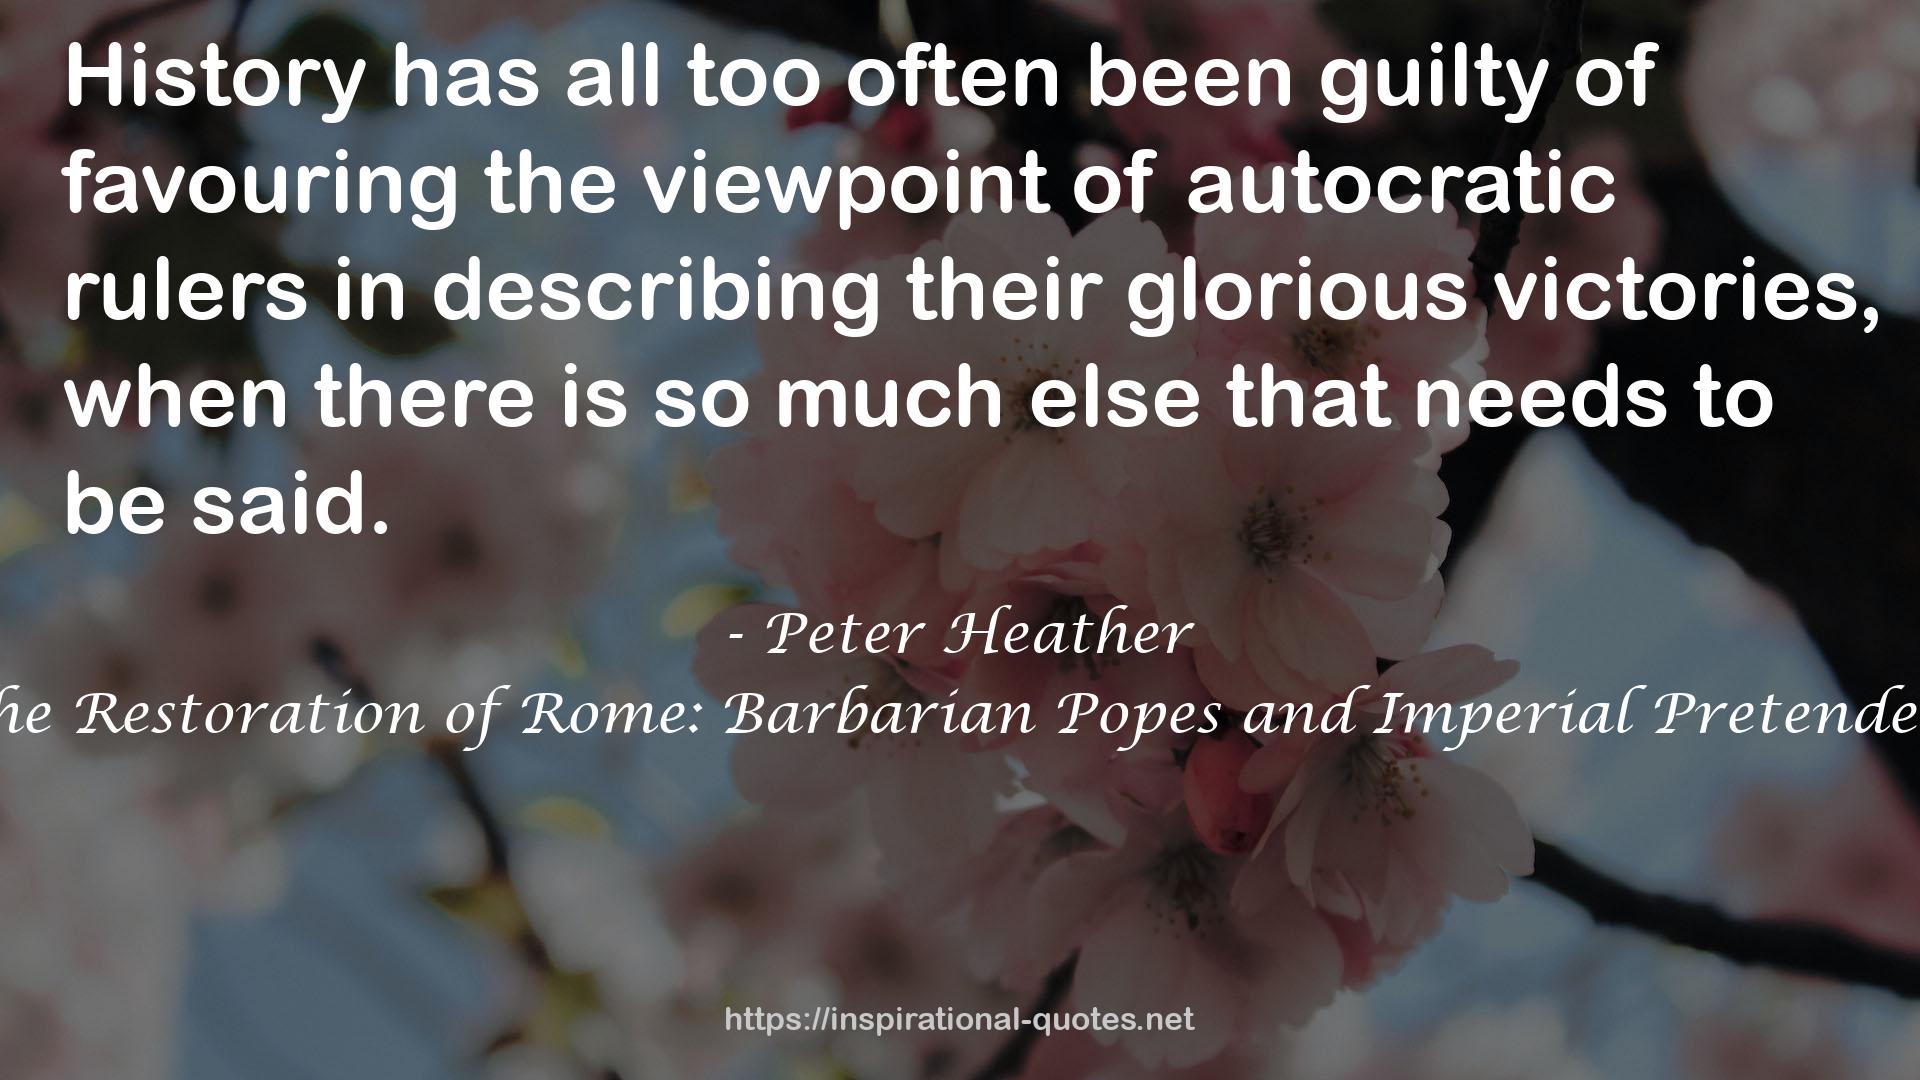 The Restoration of Rome: Barbarian Popes and Imperial Pretenders QUOTES